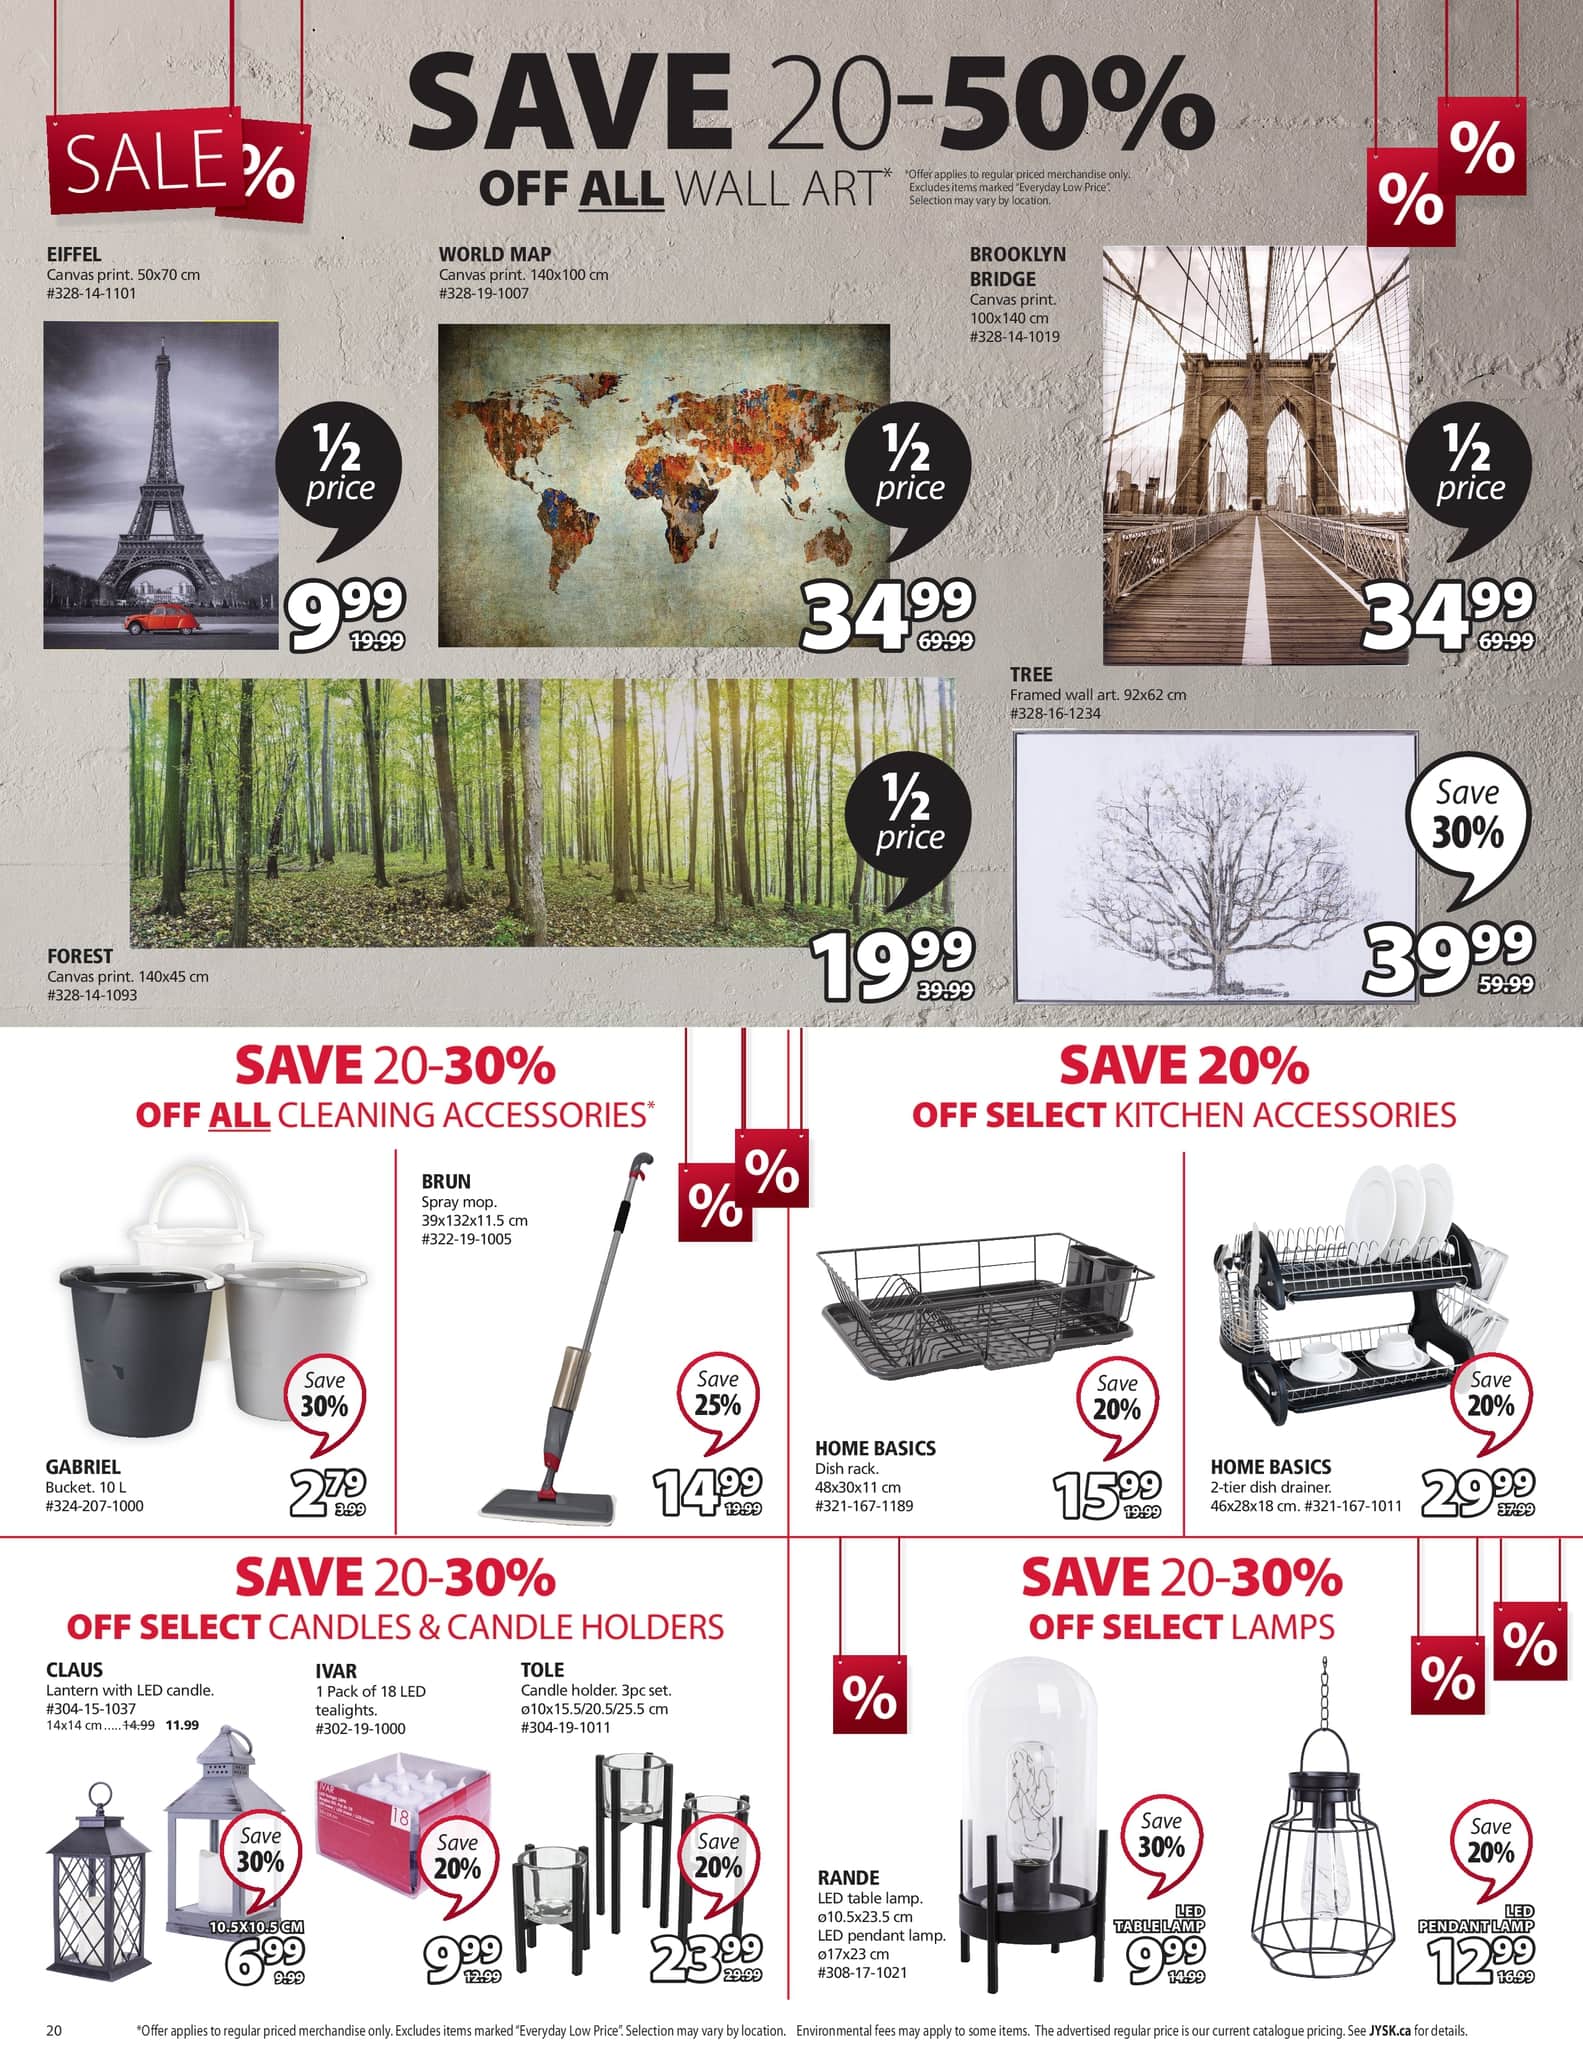 Jysk - Weekly Flyer Specials - Page 20